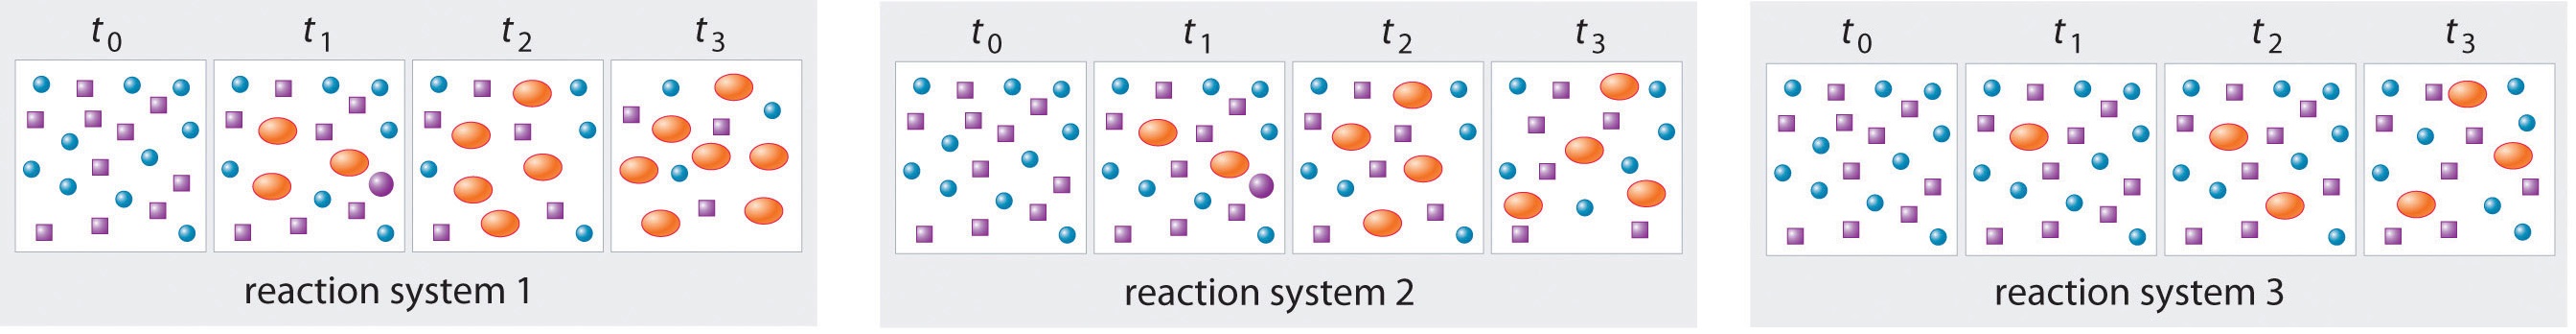 In reaction system 1 there are seven orange ovals at t3. In reaction system two there are four orange ovals at t3. In reaction system three there are three orange ovals at t3. 